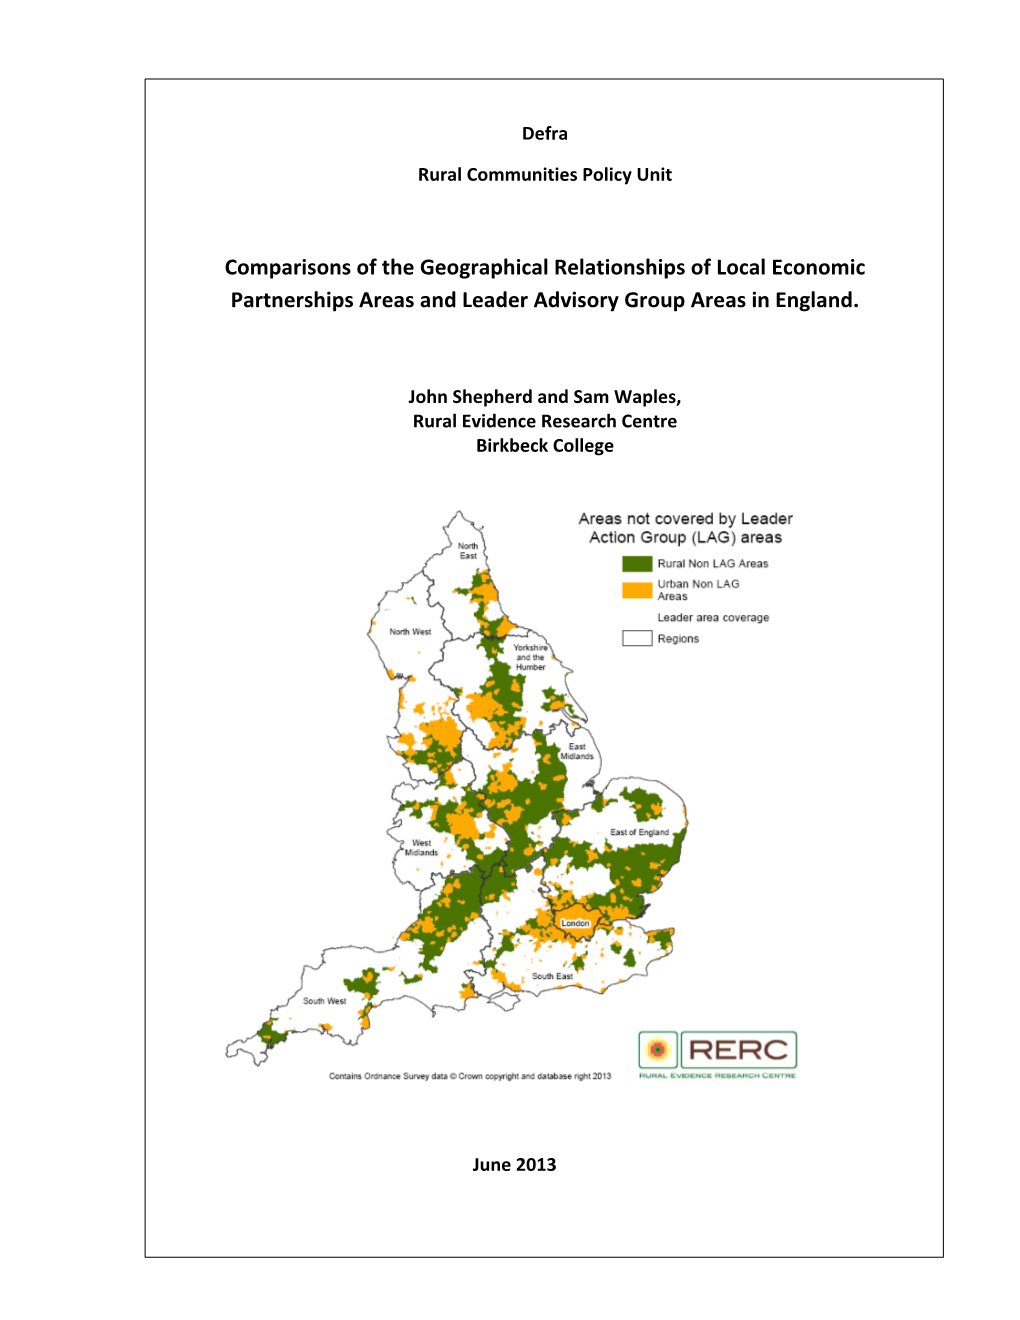 Comparisons of the Geographical Relationships of Local Economic Partnerships Areas and Leader Advisory Group Areas in England